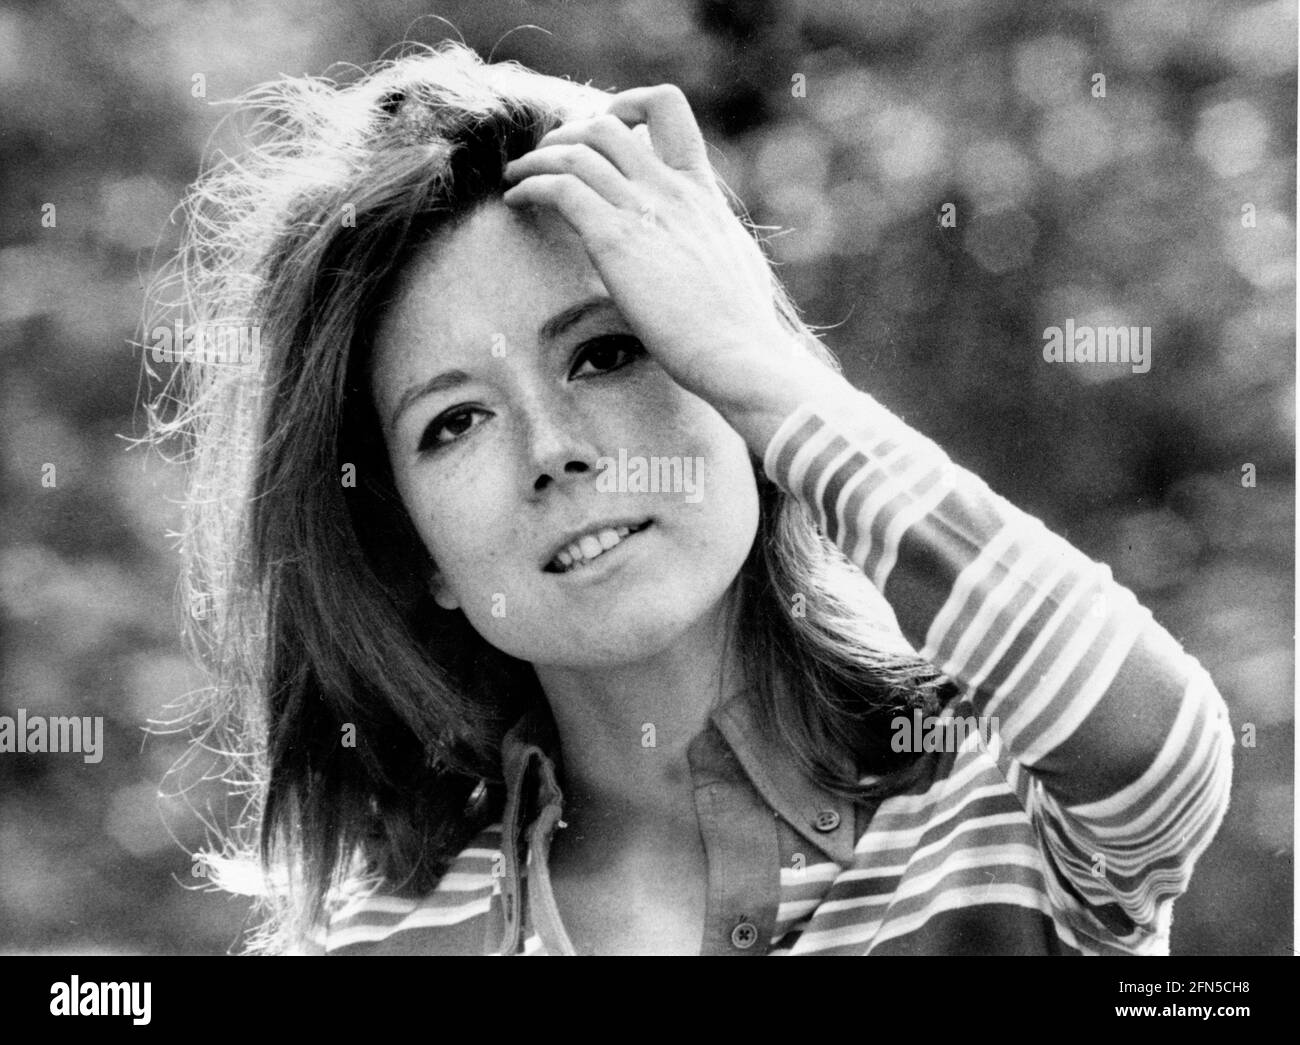 The English star of stage and screen, Diana Rigg, famous for her character Emma Peel in The Avengers, poses for the camera in the 1960s Stock Photo